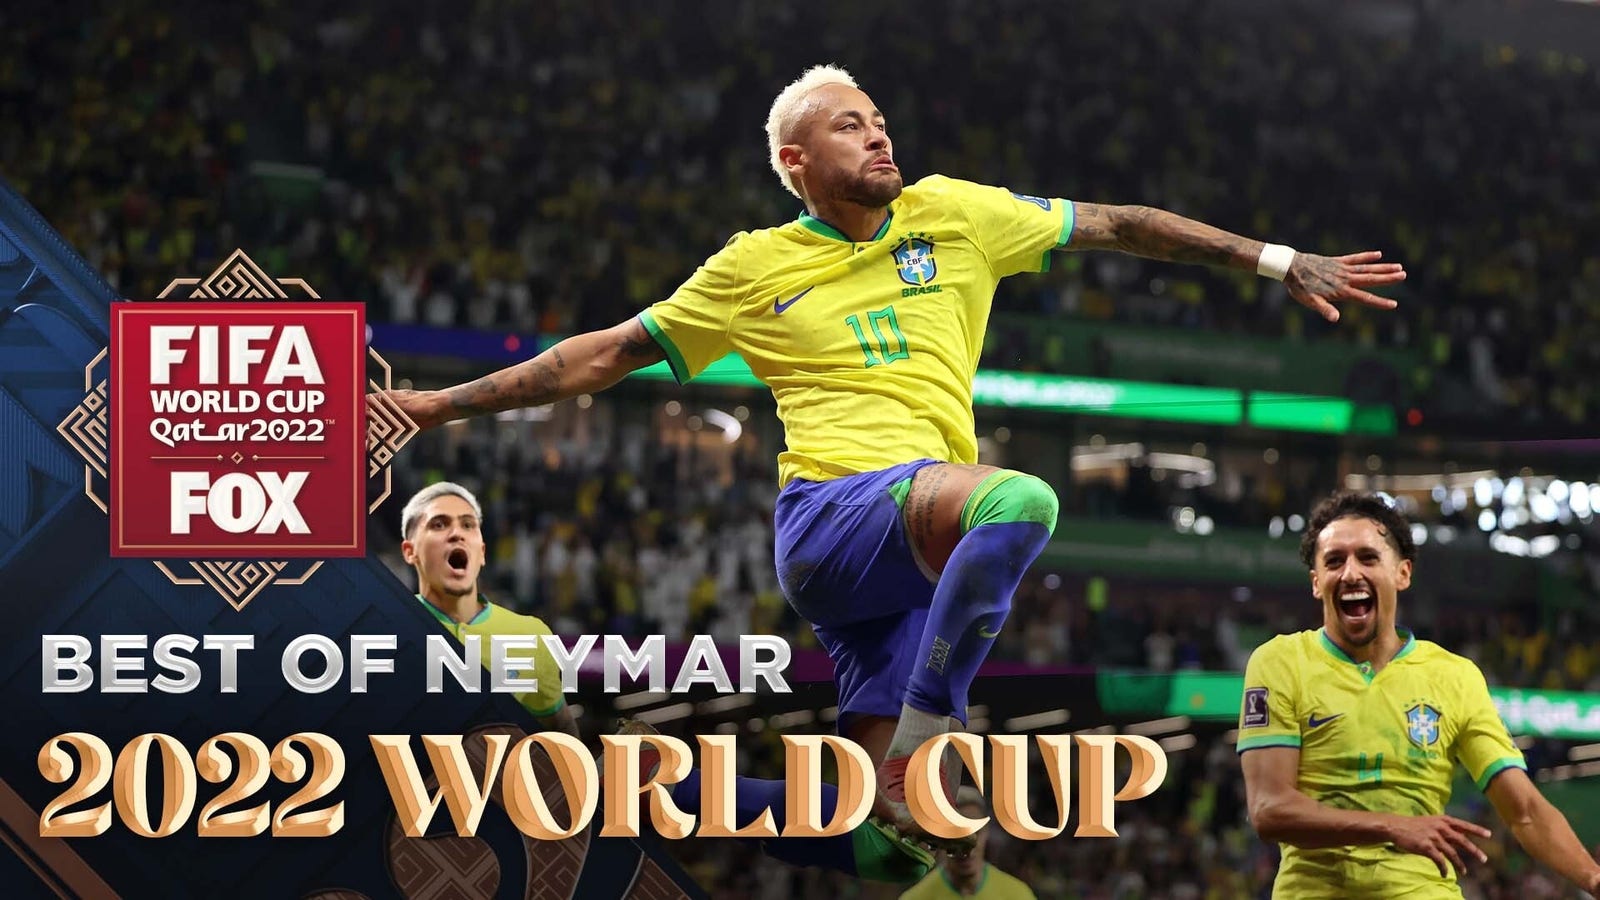 Neymar's BEST moments at the 2022 FIFA World Cup